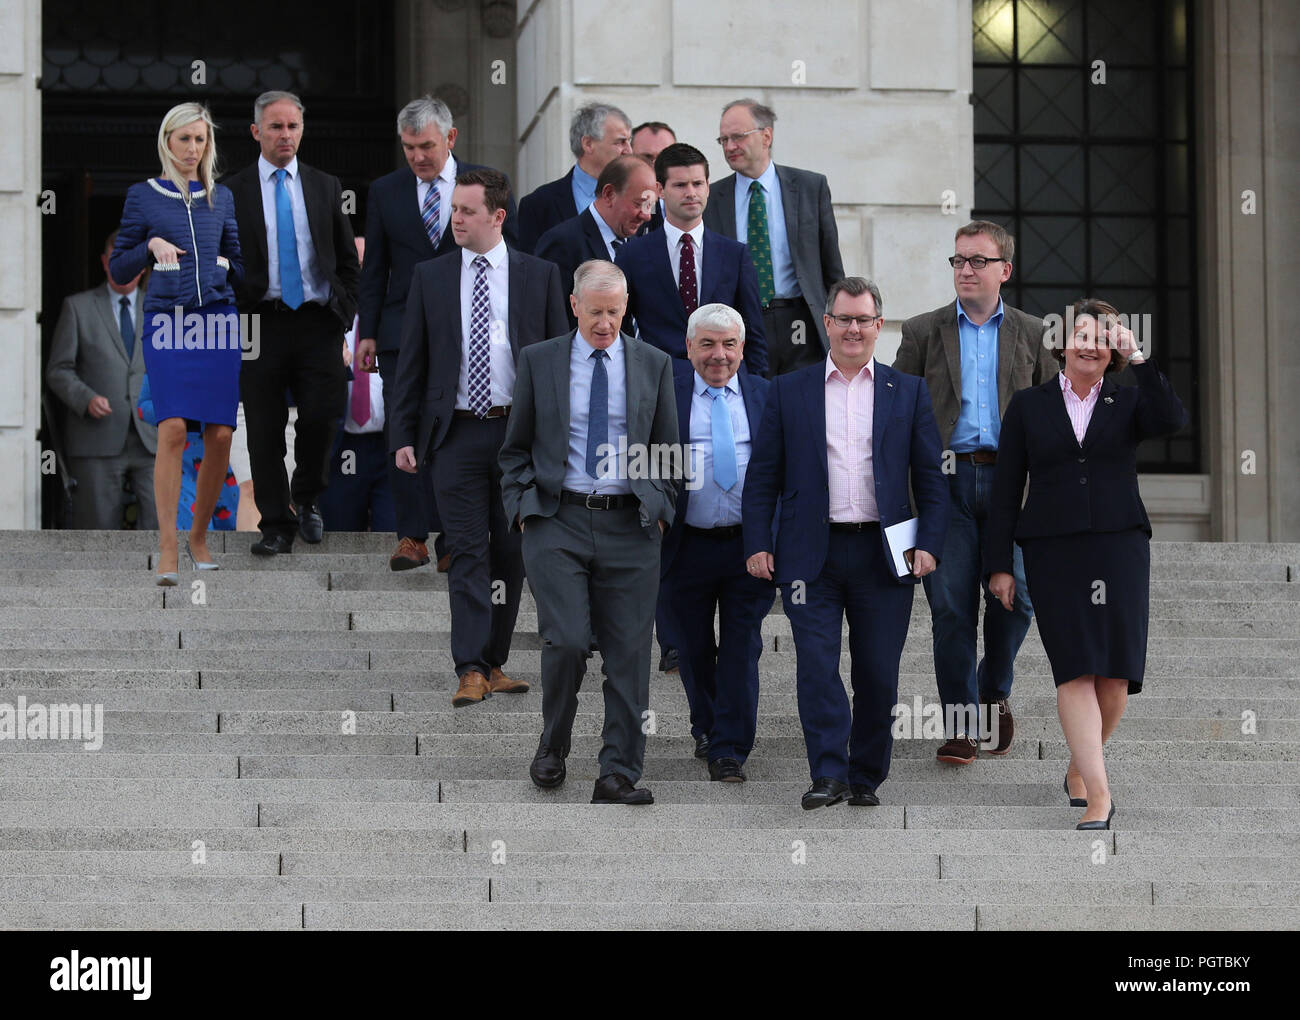 DUP leader Arlene Foster (right) and party colleagues Gregory Campbell (front left), Sir Jeffrey Donaldson (front, pink shirt) and Christopher Stalford (front right, blue shirt) arrive for a press conference outside Parliament Buildings at Stormont in Belfast. The Government has acknowledged the deep frustration of the public in Northern Ireland as the region reached an unwanted milestone for non-governance. Stock Photo